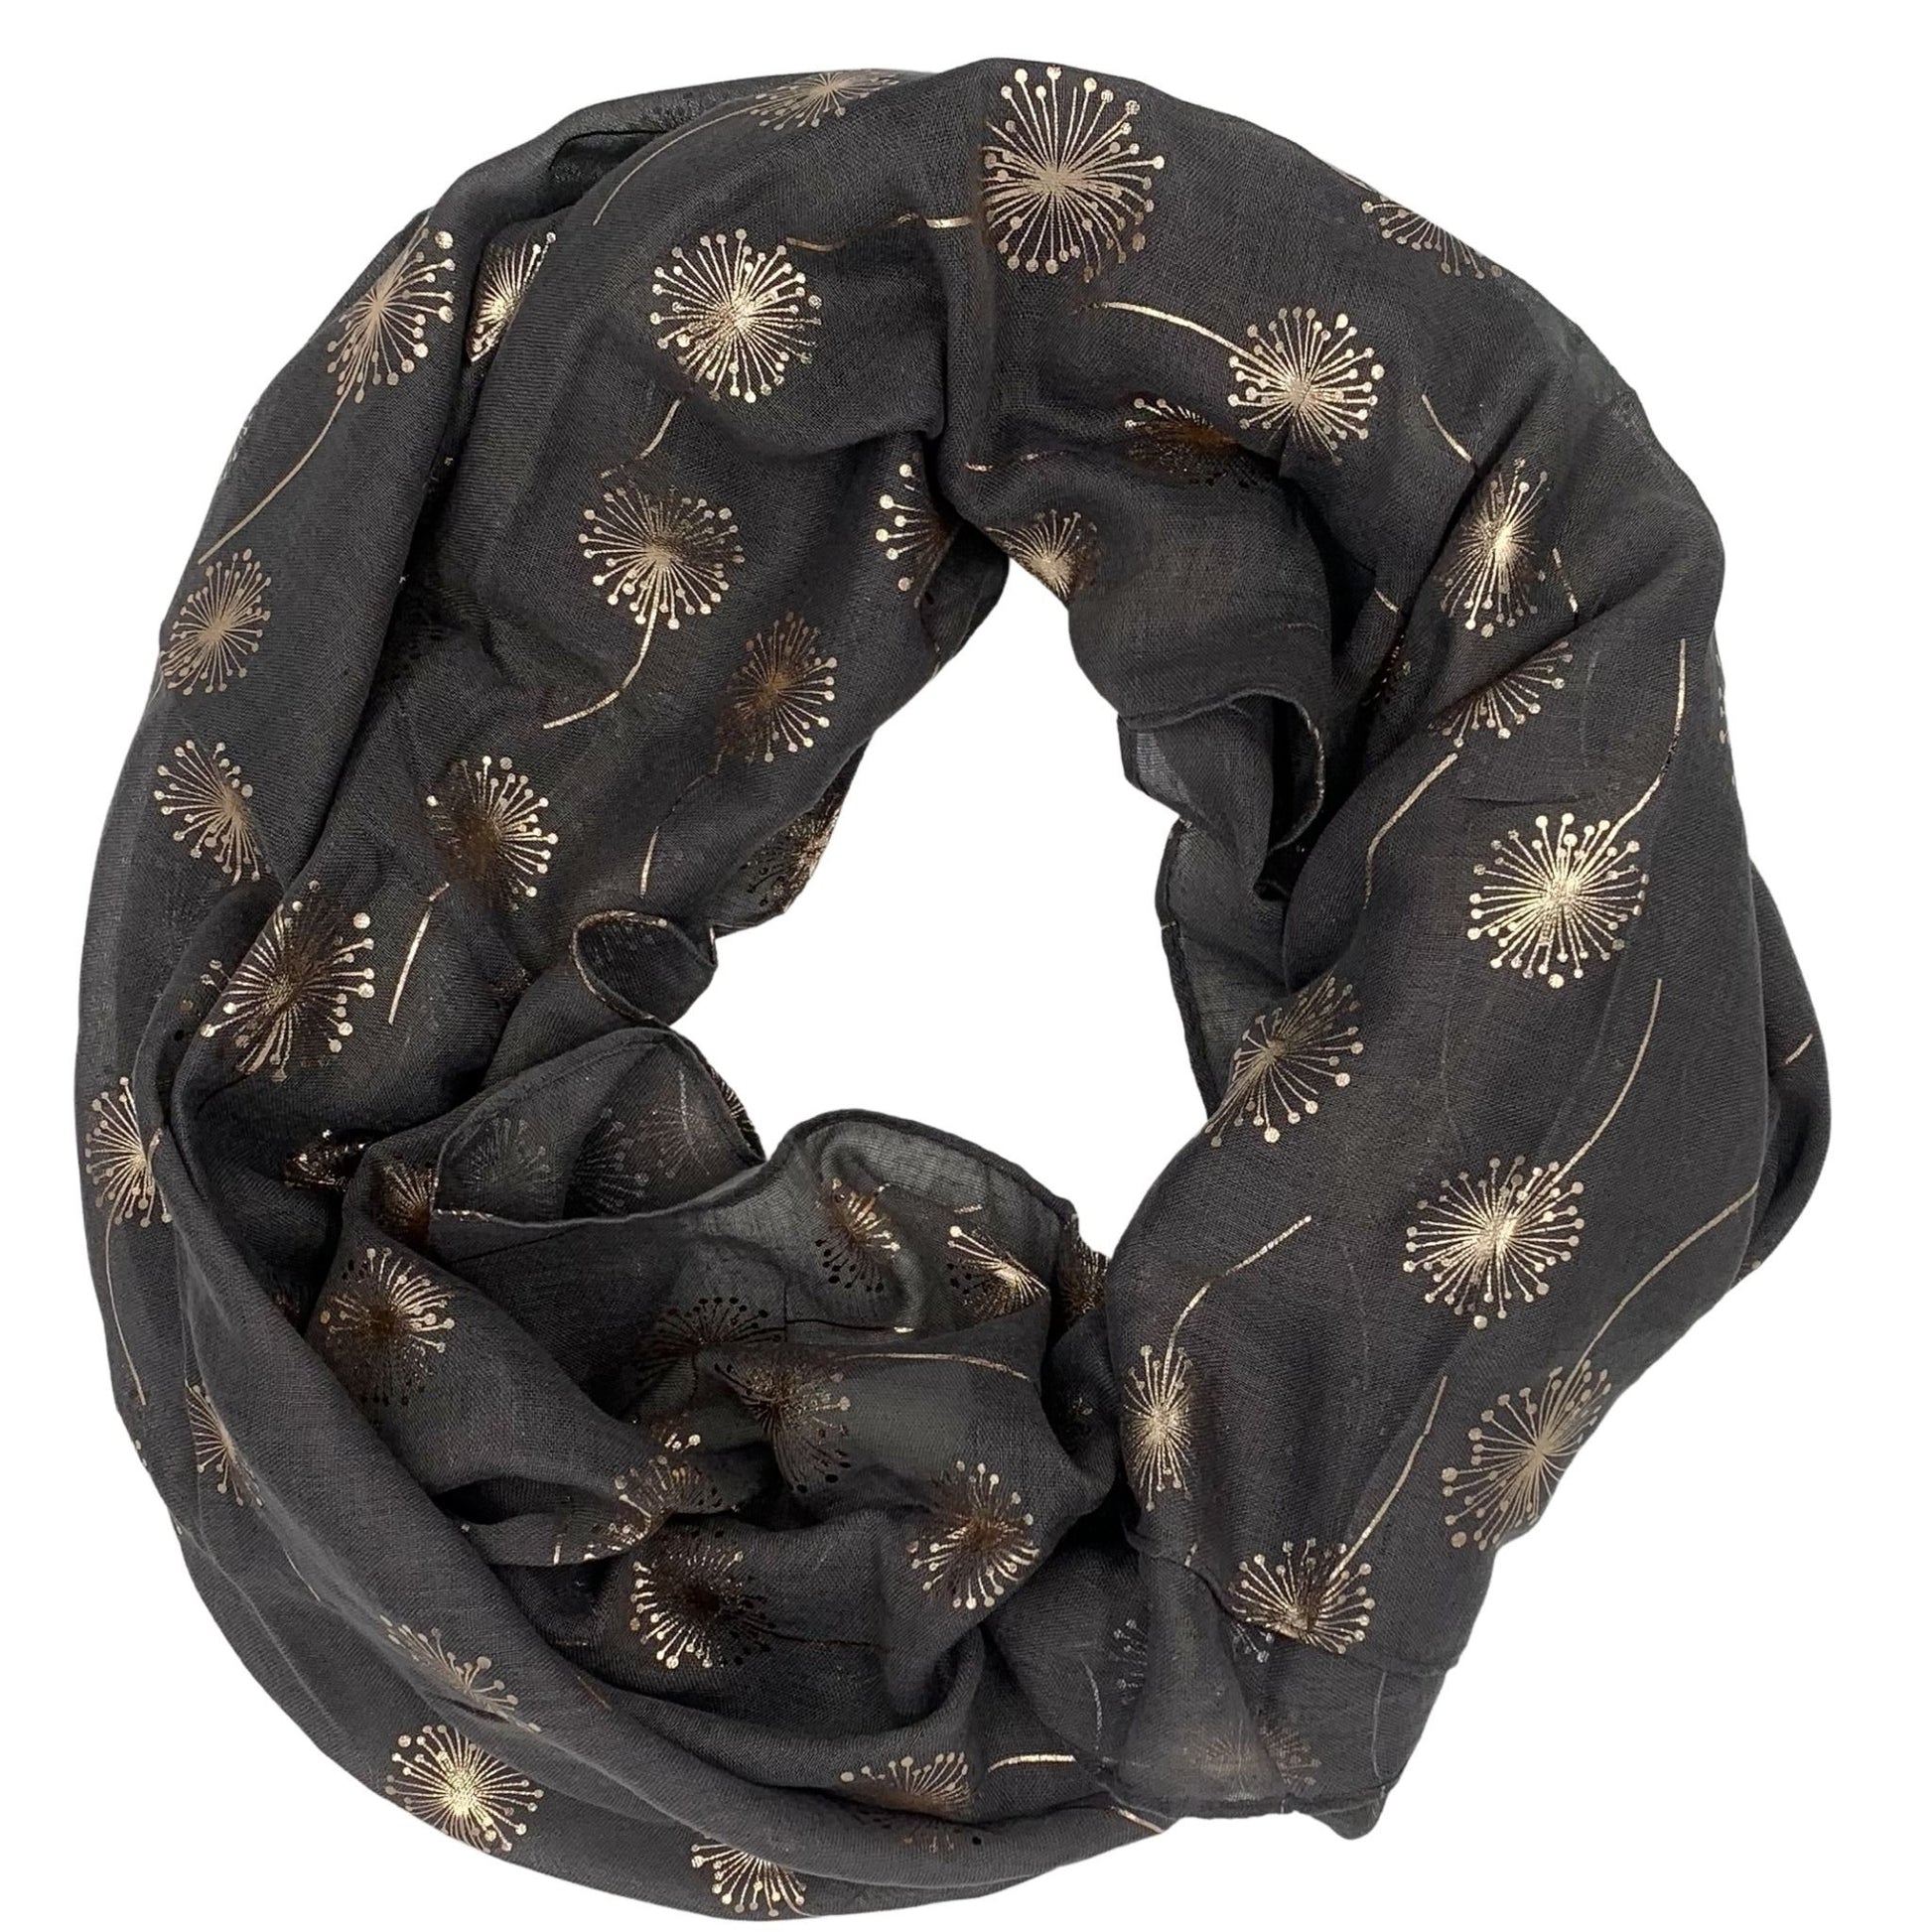 charcoal grey and rose gold dandelion scarf on white background